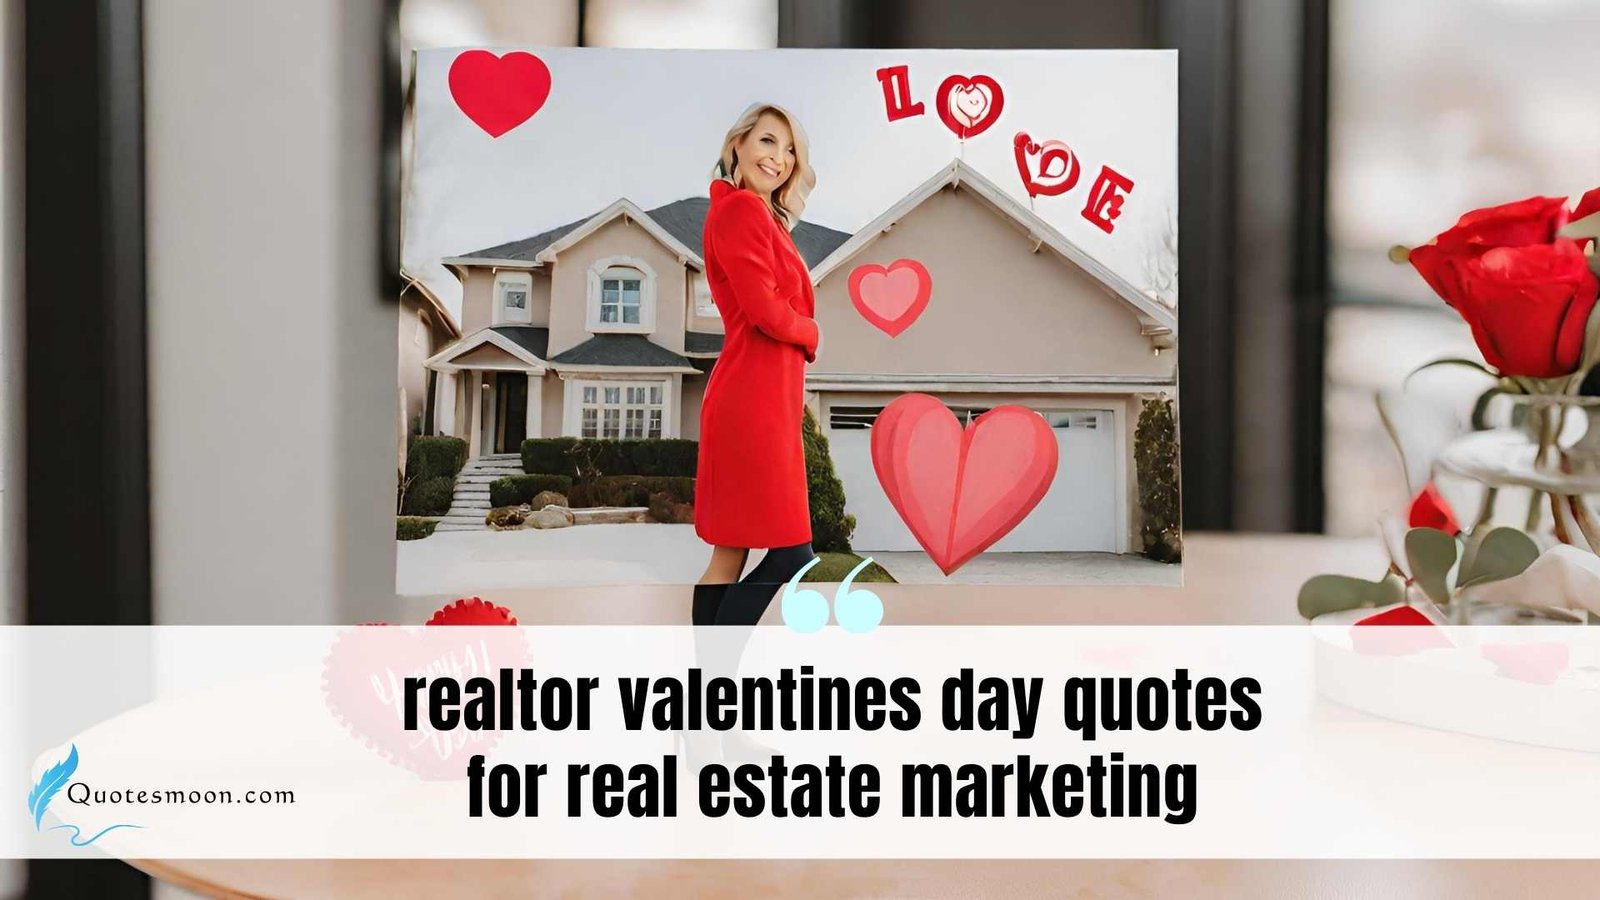 realtor valentines day quotes for real estate marketing images